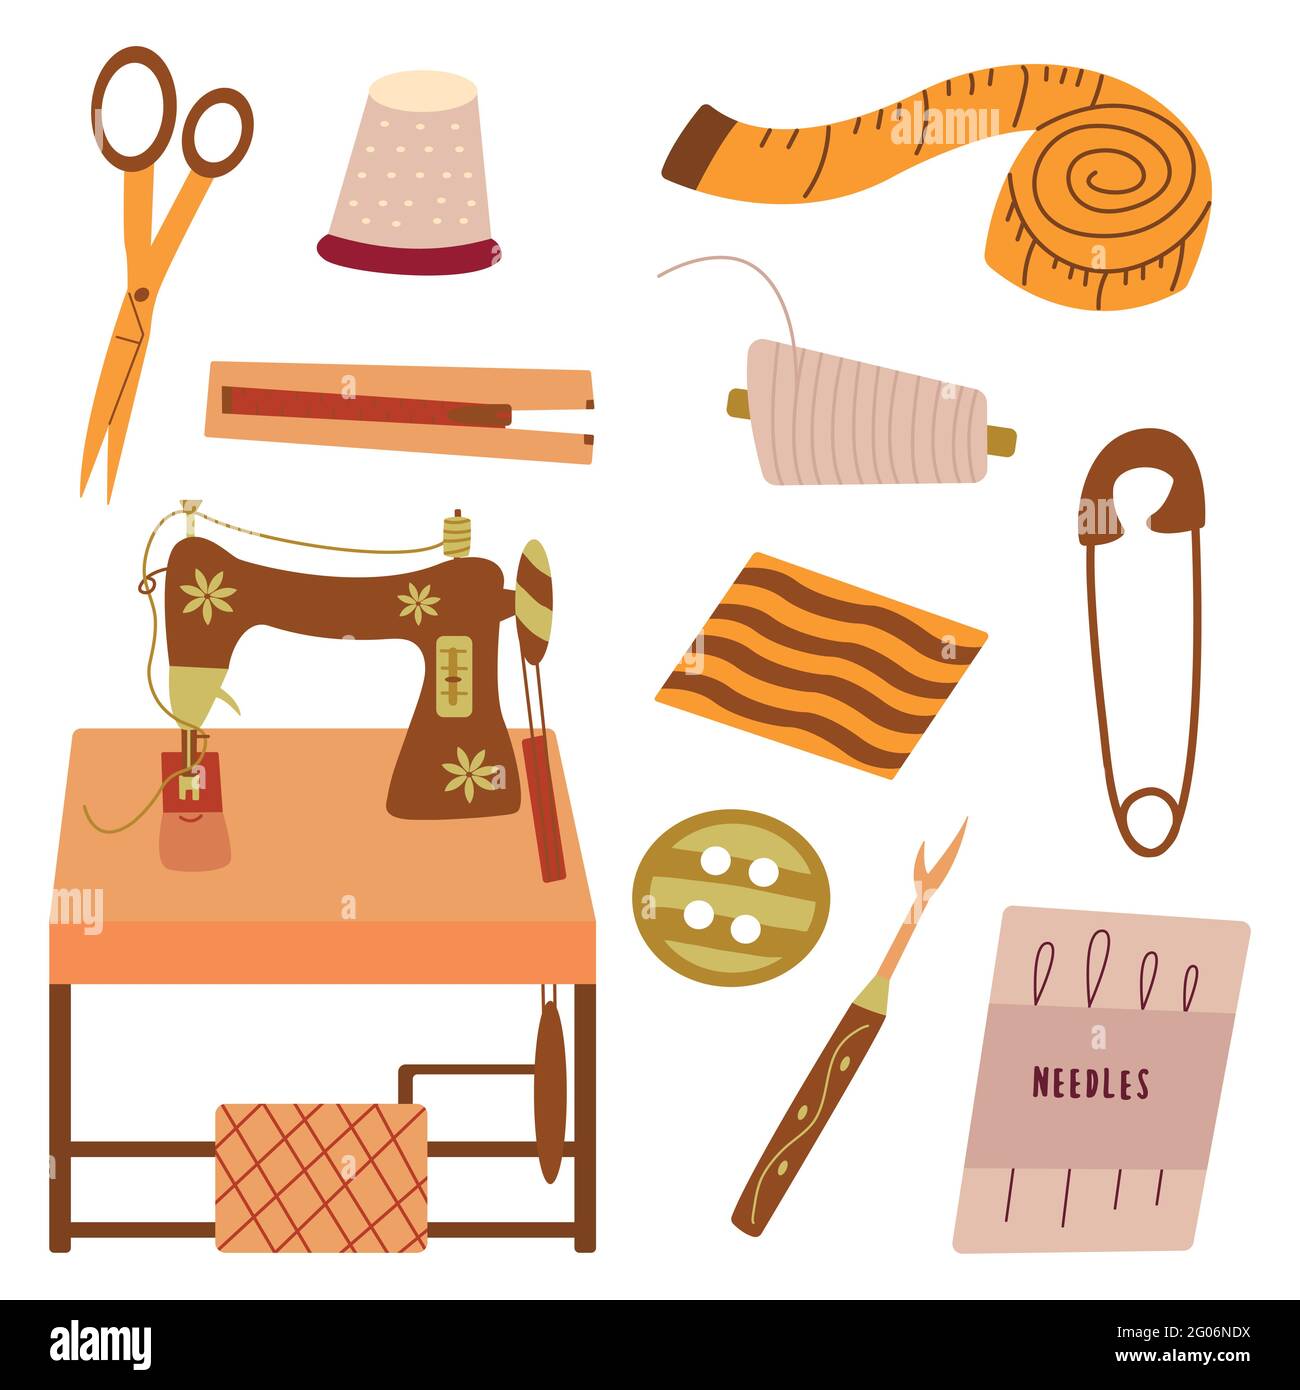 Sewing machine bobbin case Stock Vector Images - Alamy